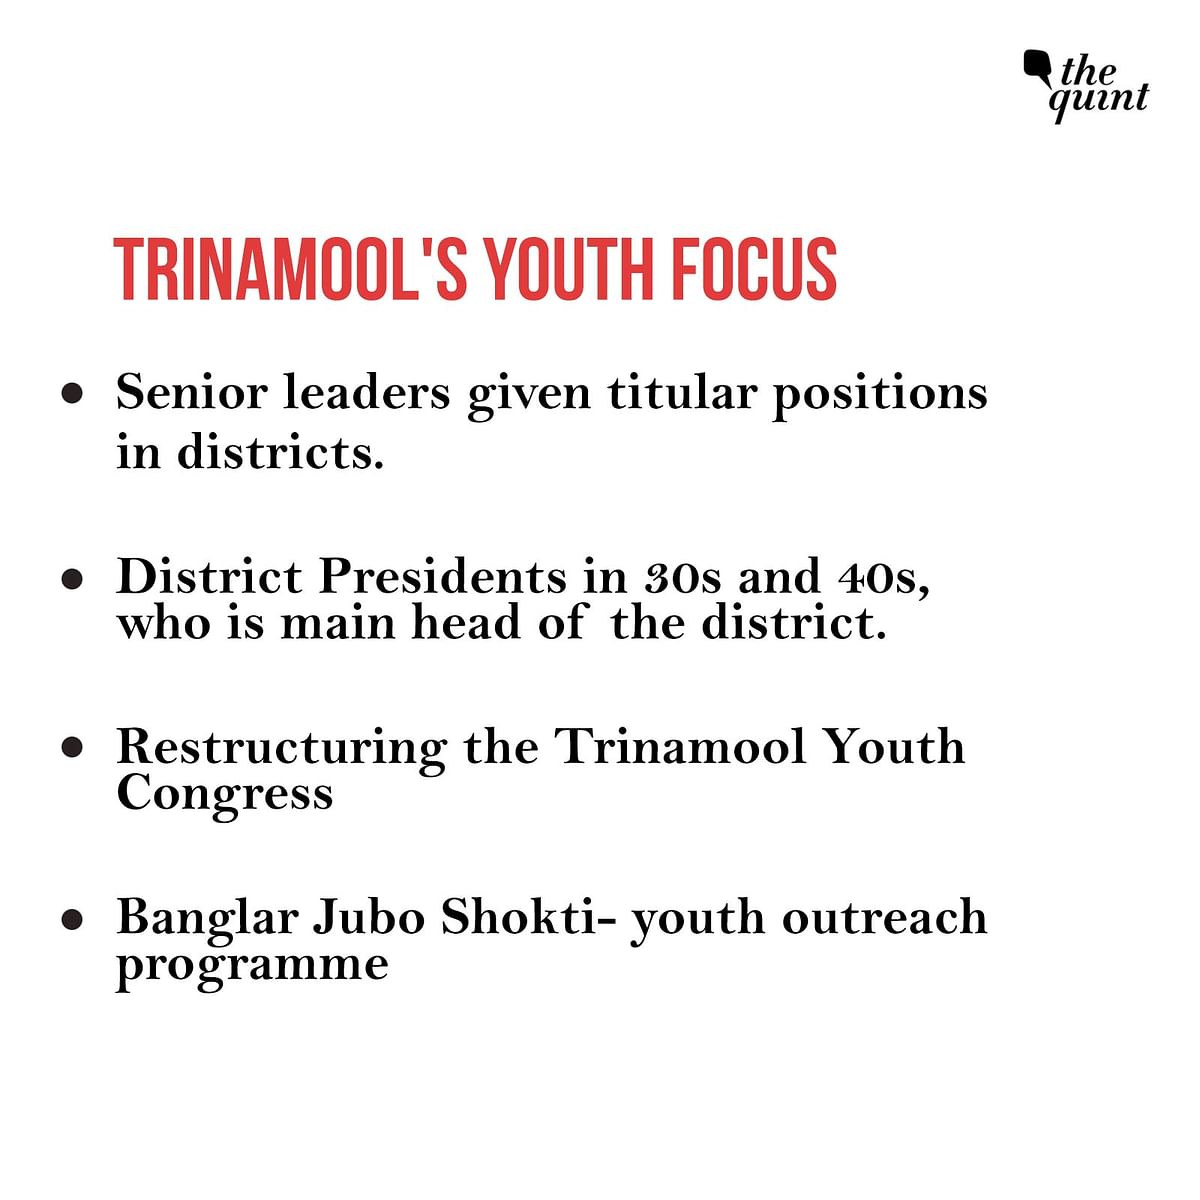 The Trinamool Congress, powered by Prashant Kishor, has undergone a structural revamp in the last year.